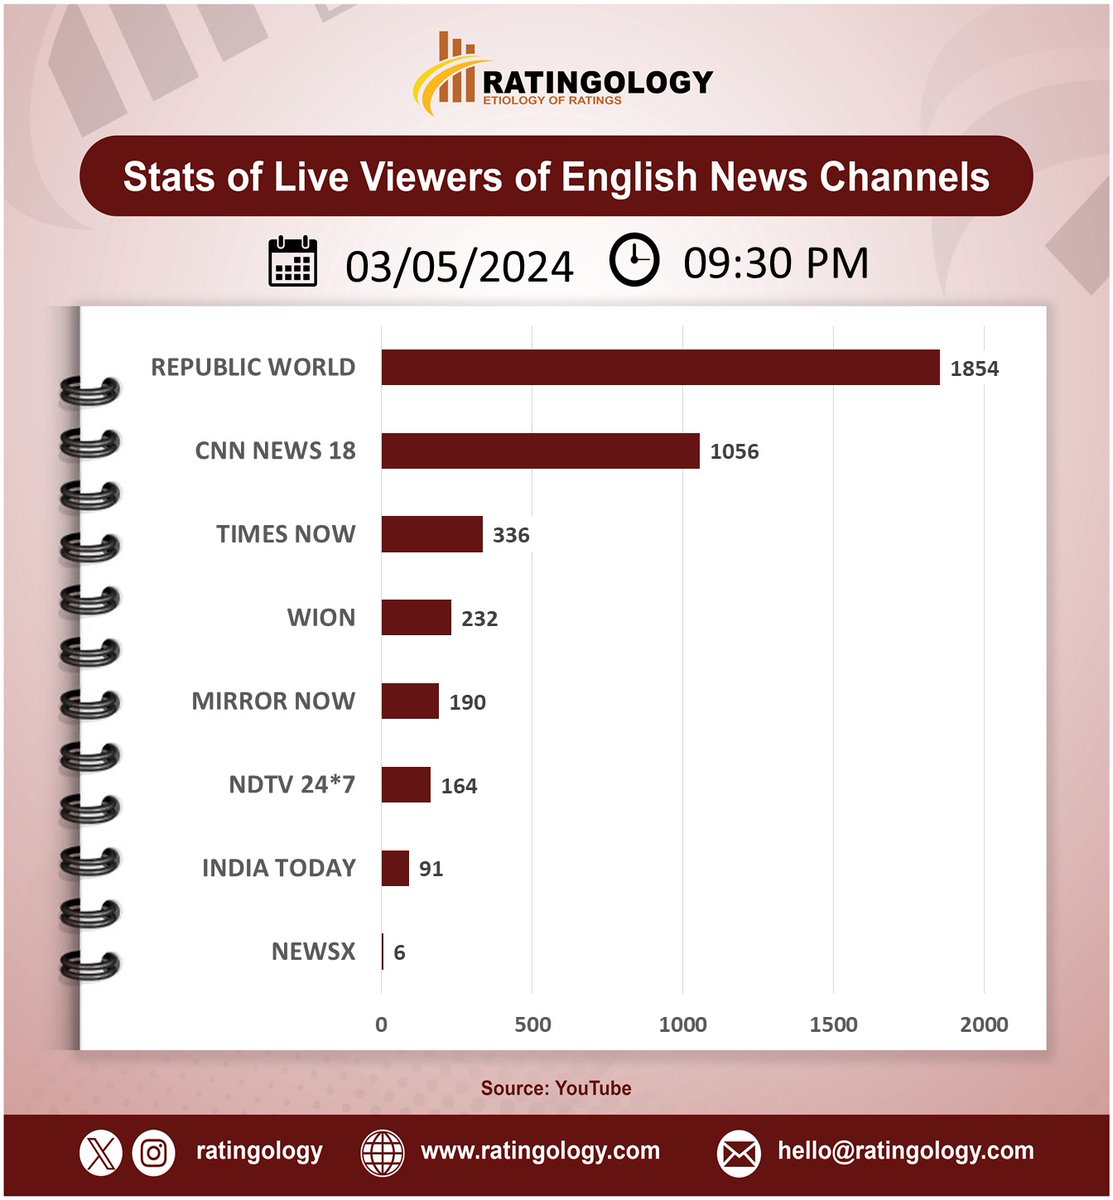 𝐒𝐭𝐚𝐭𝐬 𝐨𝐟 𝐥𝐢𝐯𝐞 𝐯𝐢𝐞𝐰𝐞𝐫𝐬 𝐨𝐧 #Youtube of #EnglishMedia #channelsat 09:30pm, Date: 03/May/2024  #Ratingology #Mediastats #RatingsKaBaap #DataScience #IndiaToday #Wion #RepublicTV #CNNNews18 #TimesNow #NewsX #NDTV24x7 #MirrorNow